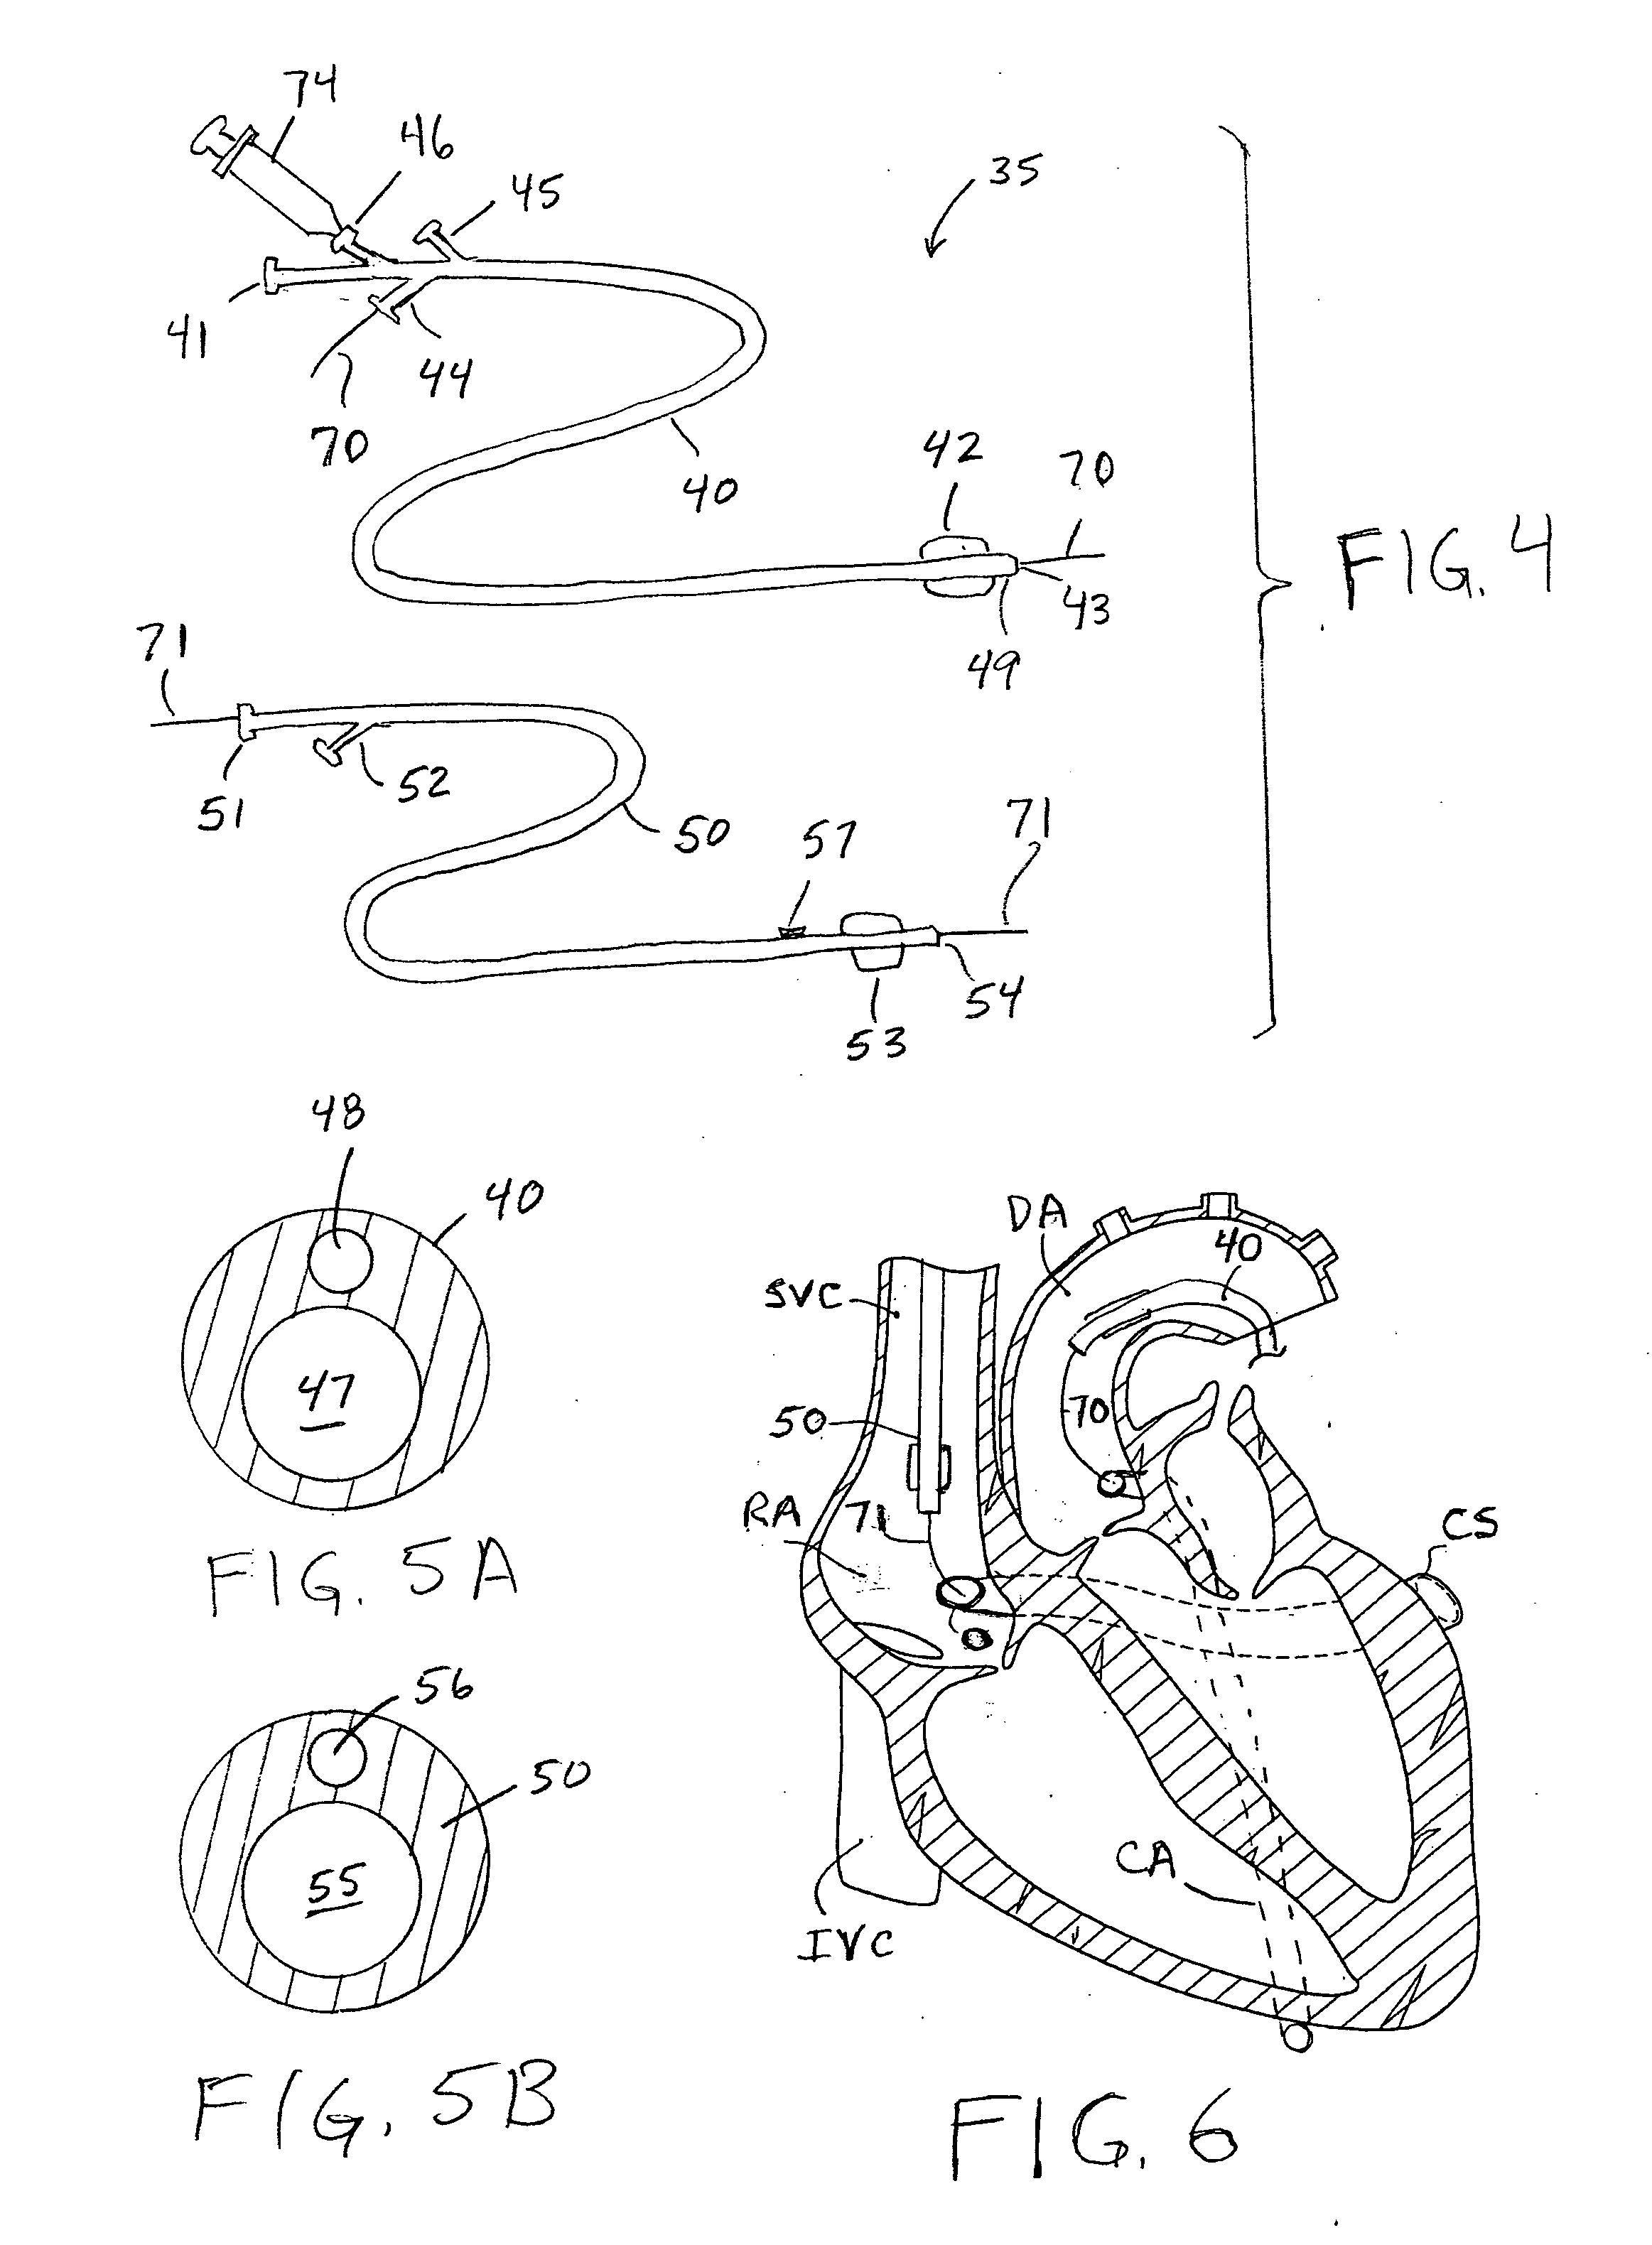 Methods and apparatus for treating infarcted regions of tissue following acute myocardial infarction